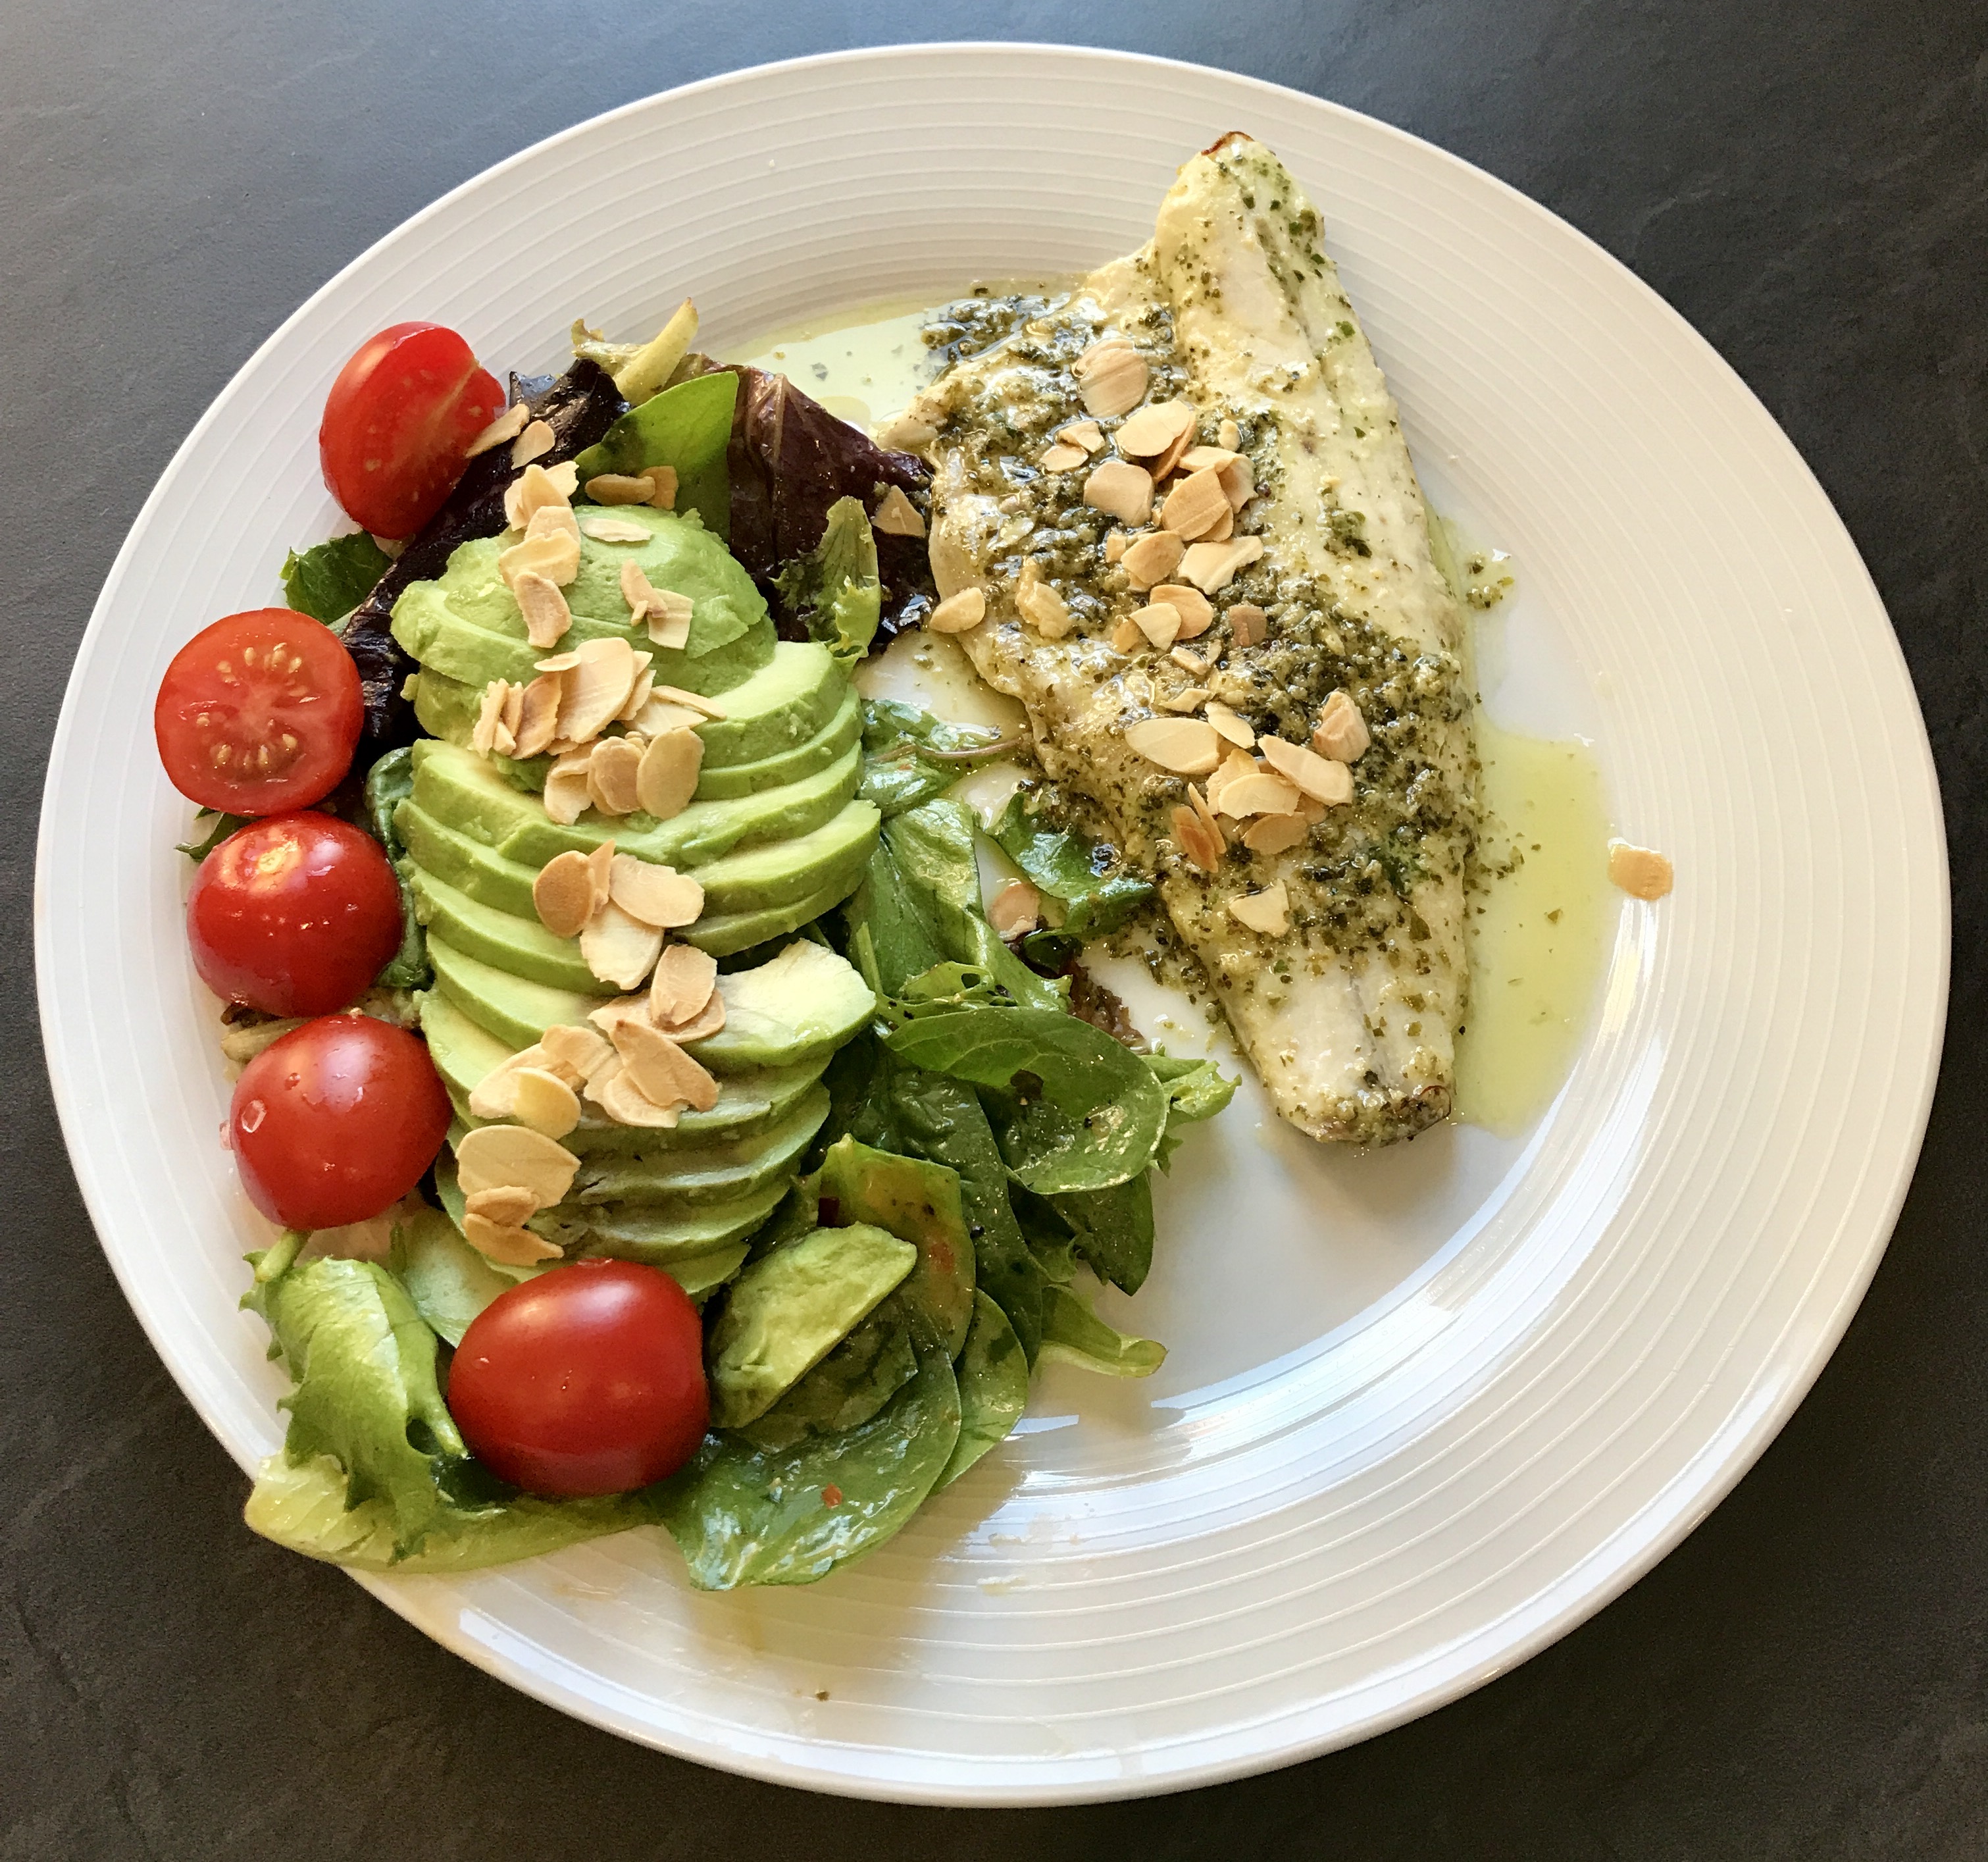 Pesto sea bass and almonds with a tropical salad